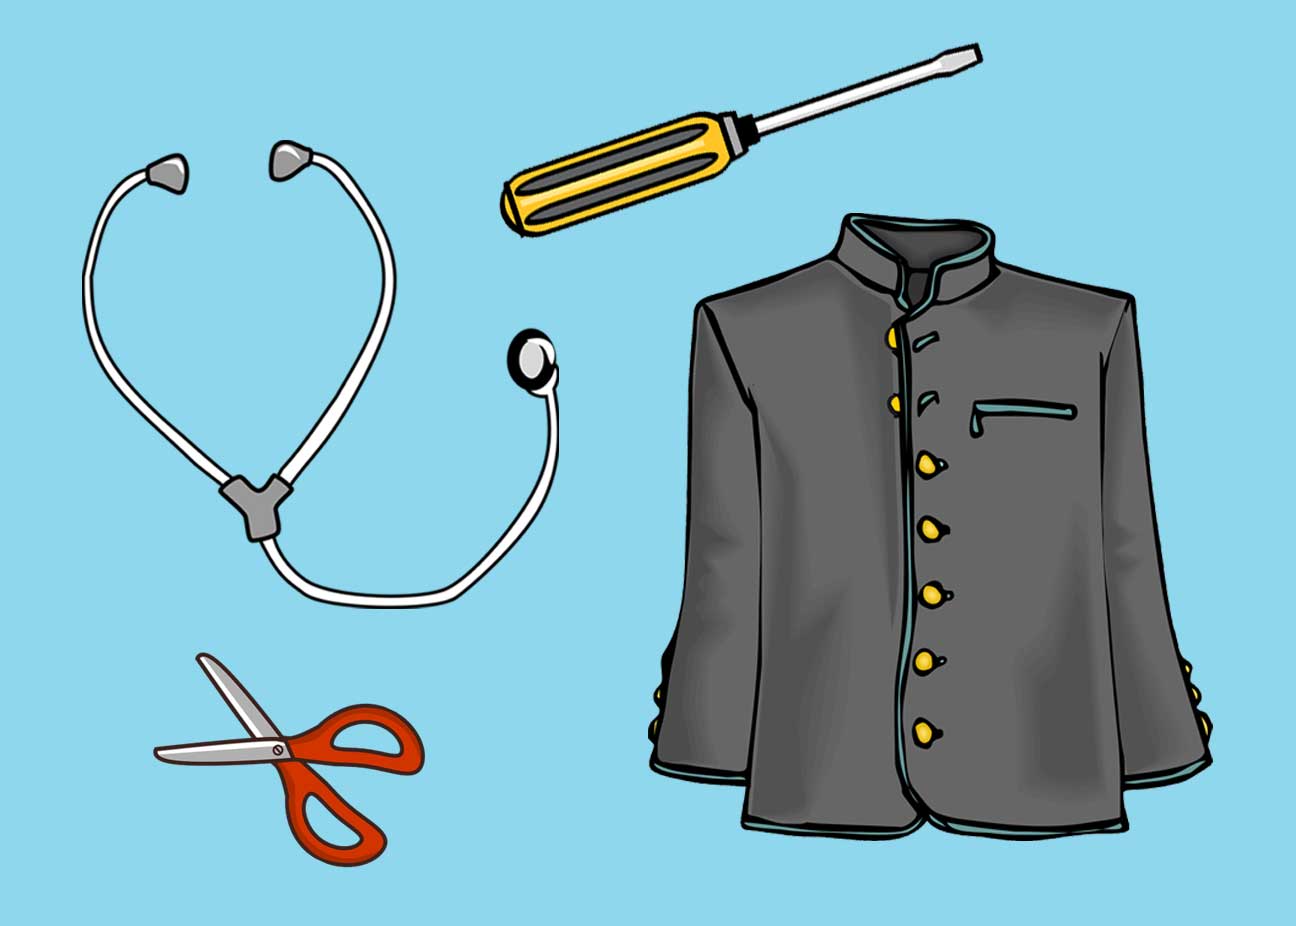 Items from the world of work, including a uniform, a screwdriver, a pair of scissors and a stethoscope.